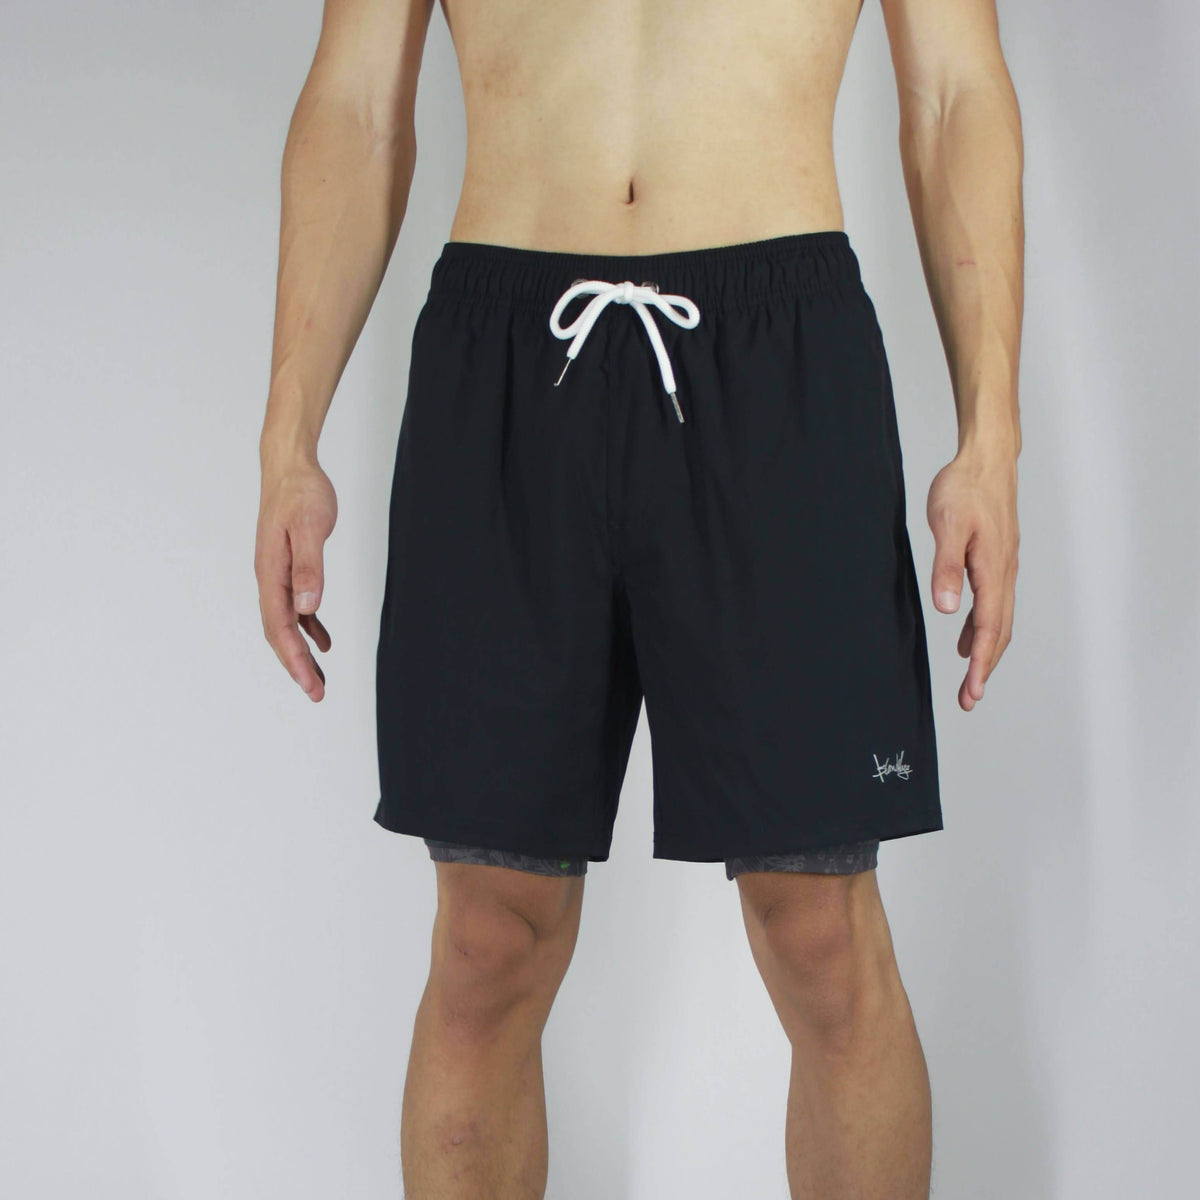 2 in 1 Stretch Men's Swim Trunks With Compression Liner Gym Shorts Black